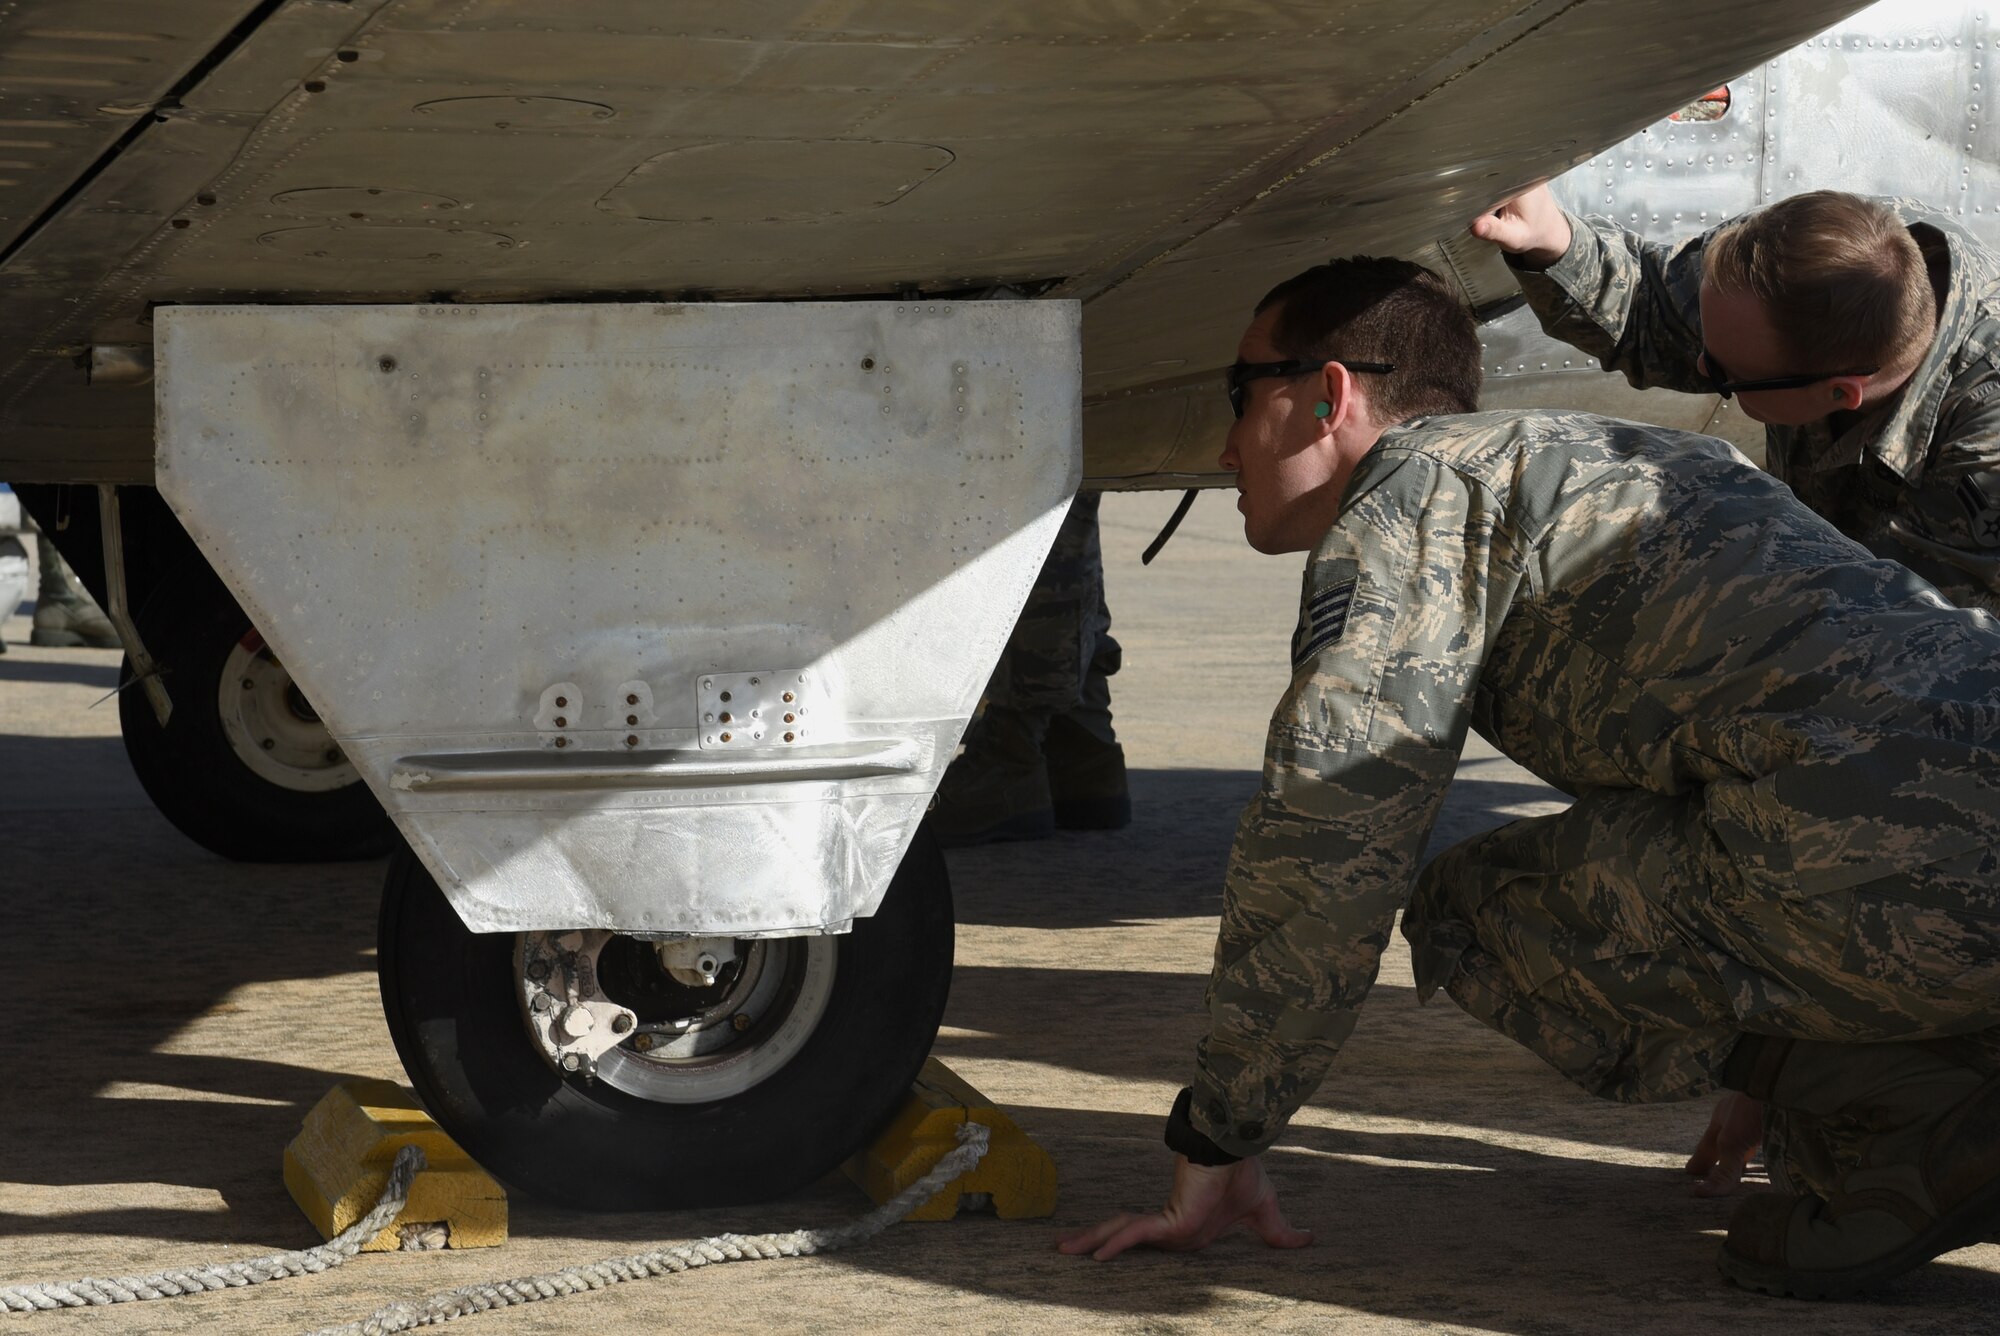 Members from the 4th Equipment Maintenance Squadron corrosion control shop inspect an unpainted T-34C Turbo Mentor, April 10, 2017, at Seymour Johnson Air Force Base, North Carolina. Members of 4 EMS painted two T-34C Turbo Mentors for the North Carolina Forest Service aviation division. (U.S. Air Force photo by Airman 1st Class Victoria Boyton)